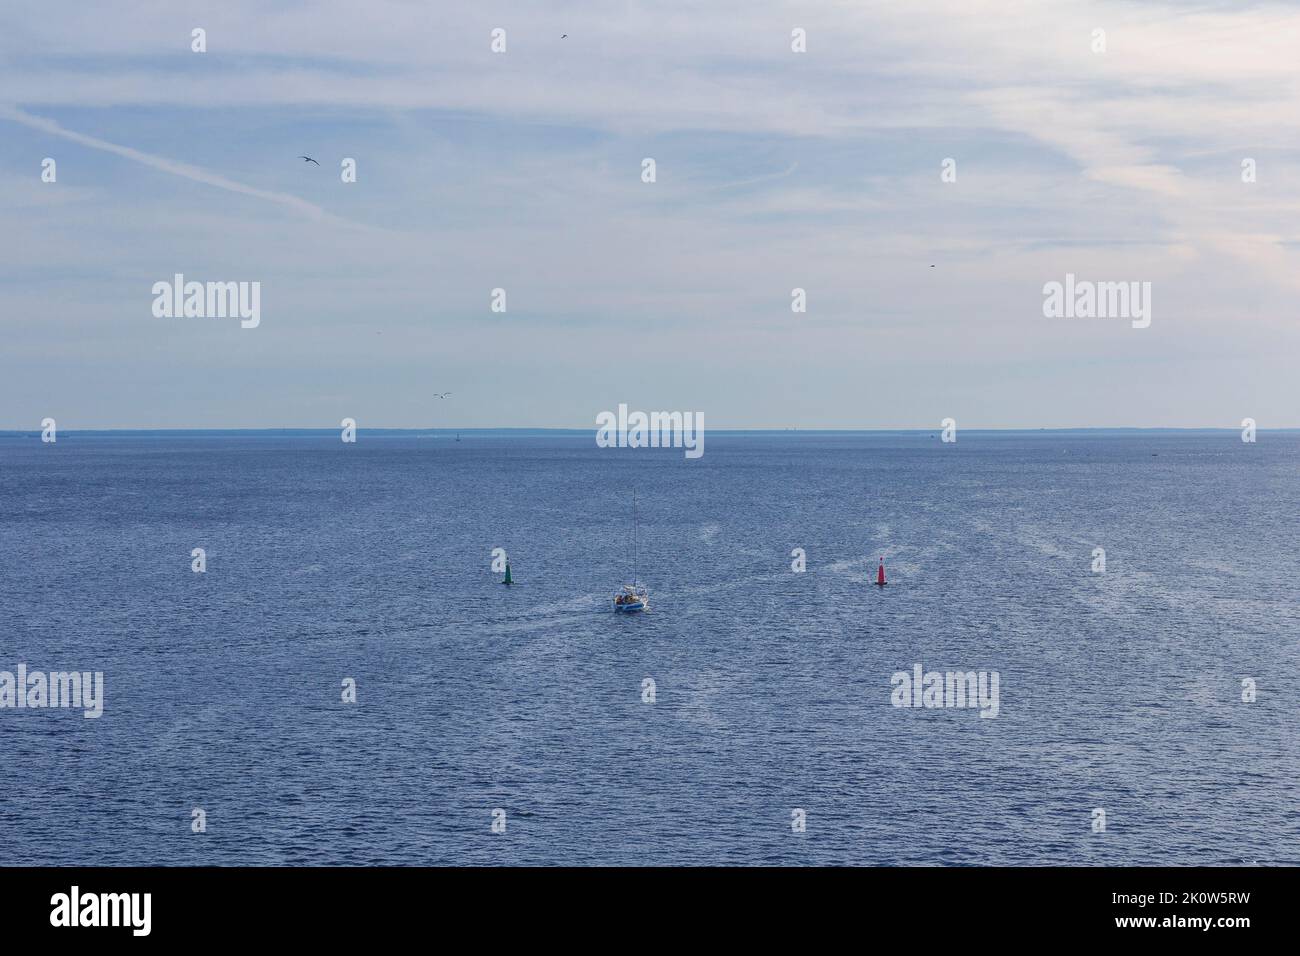 Red and green navigational buoys, starboard and port side buoys on open water Stock Photo